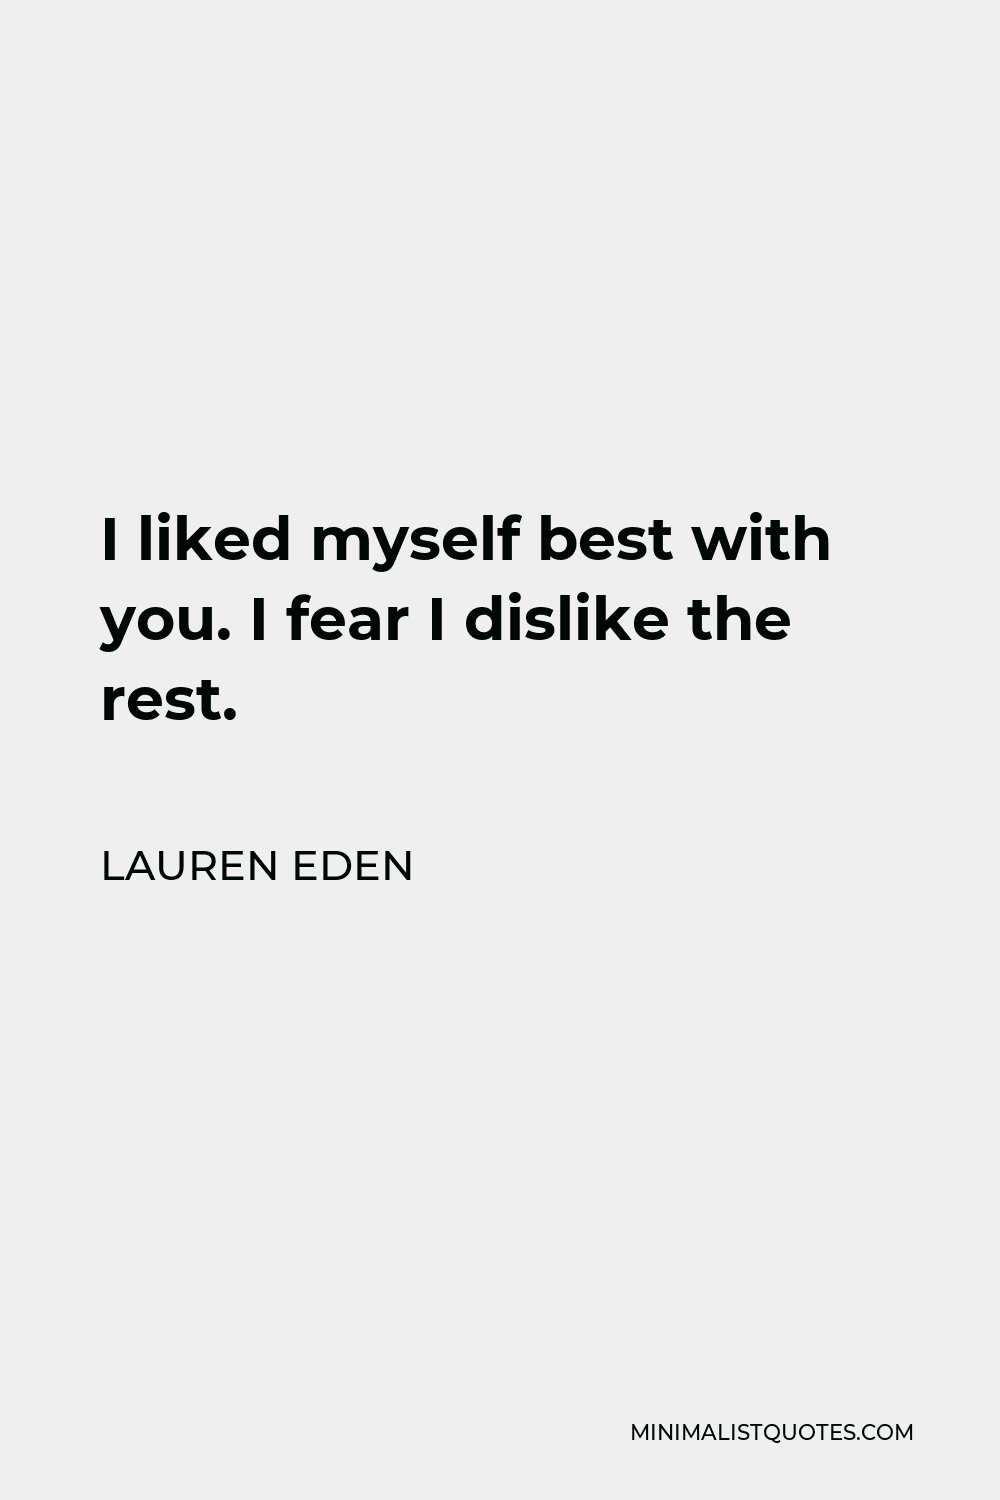 Lauren Eden Quote - I liked myself best with you. I fear I dislike the rest.